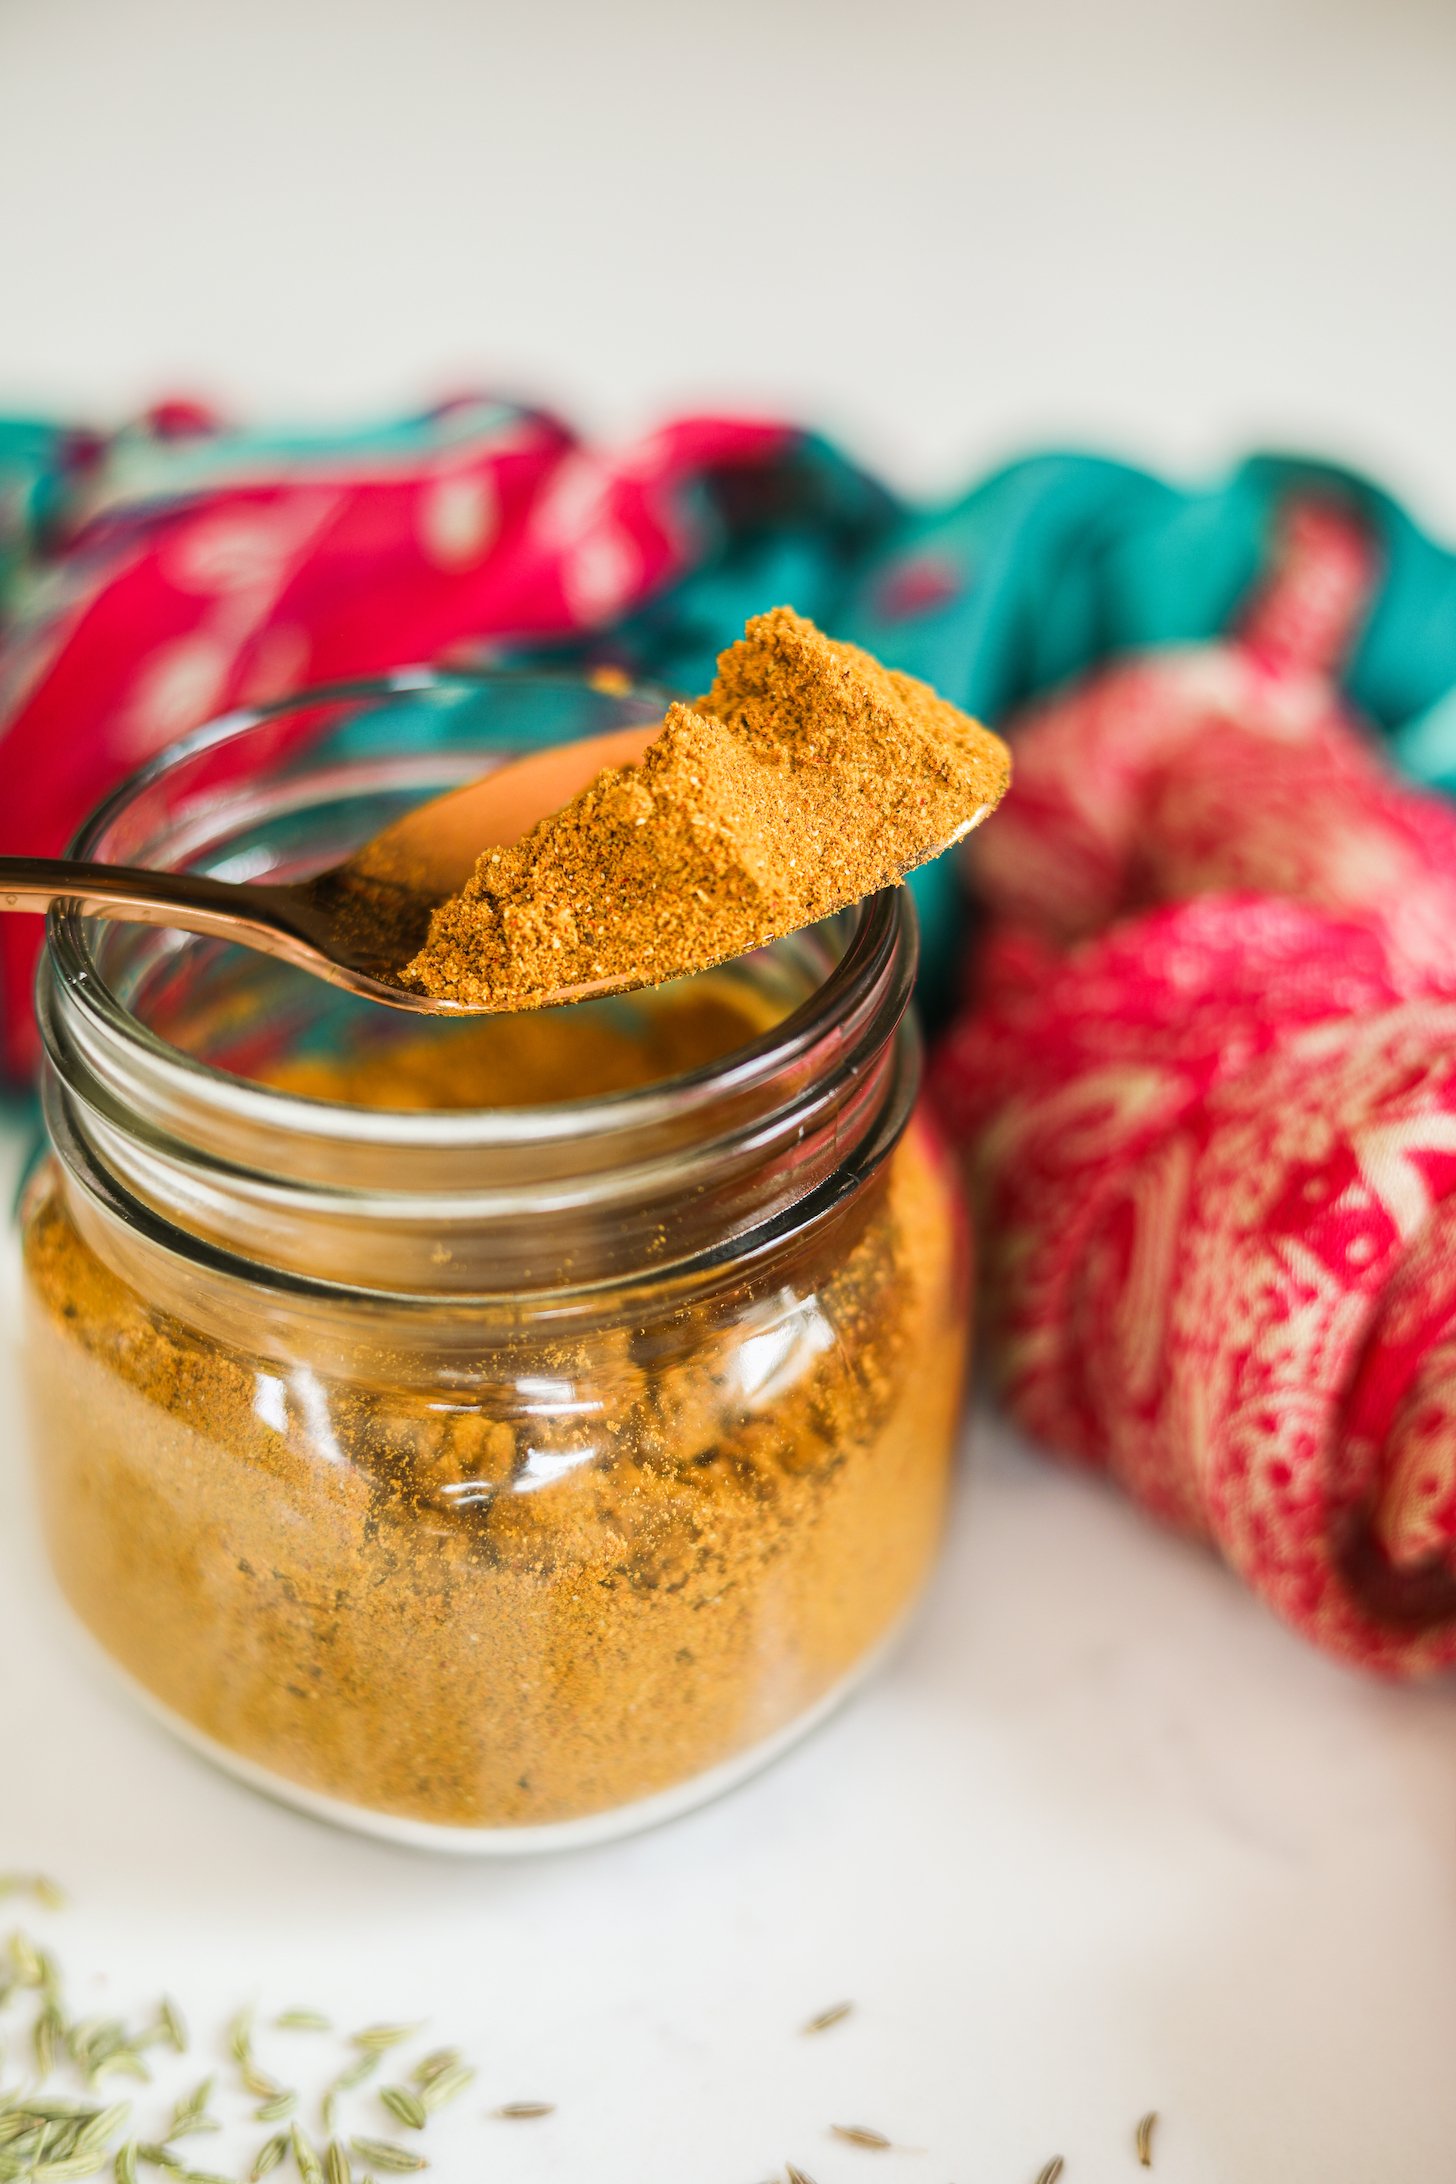 A heap-ful spoon of yellow spice powder sitting on a jar of ground spices.